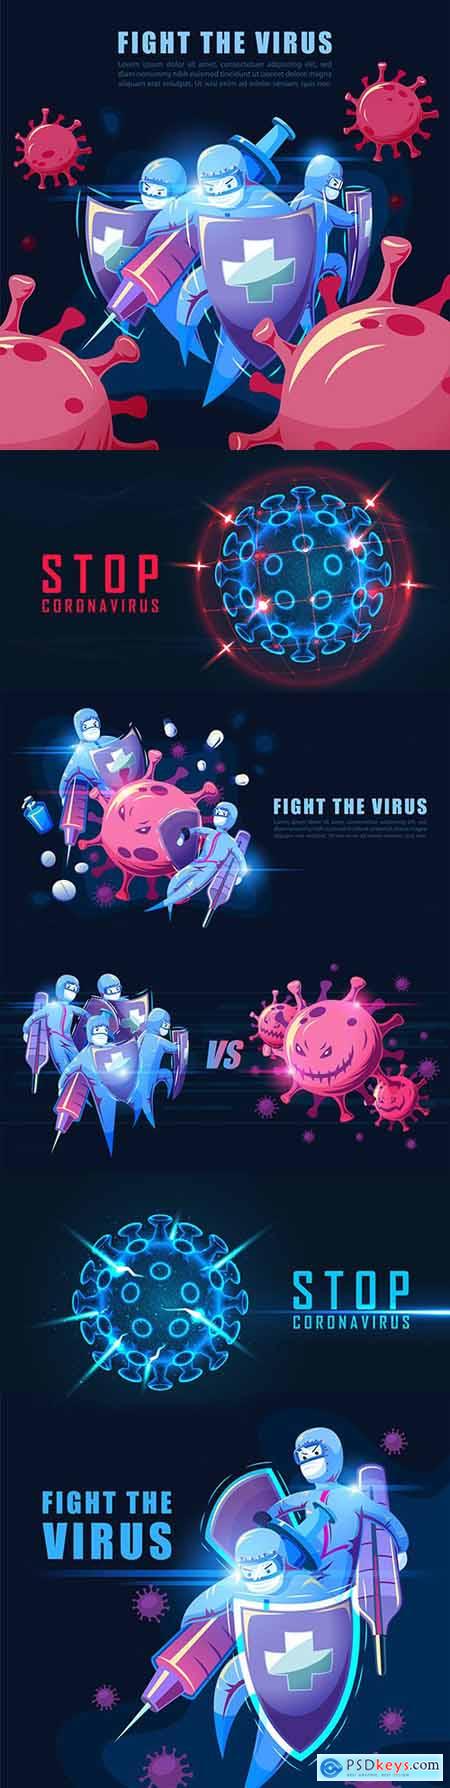 Protection against coronavirus infection and prevention illustration health